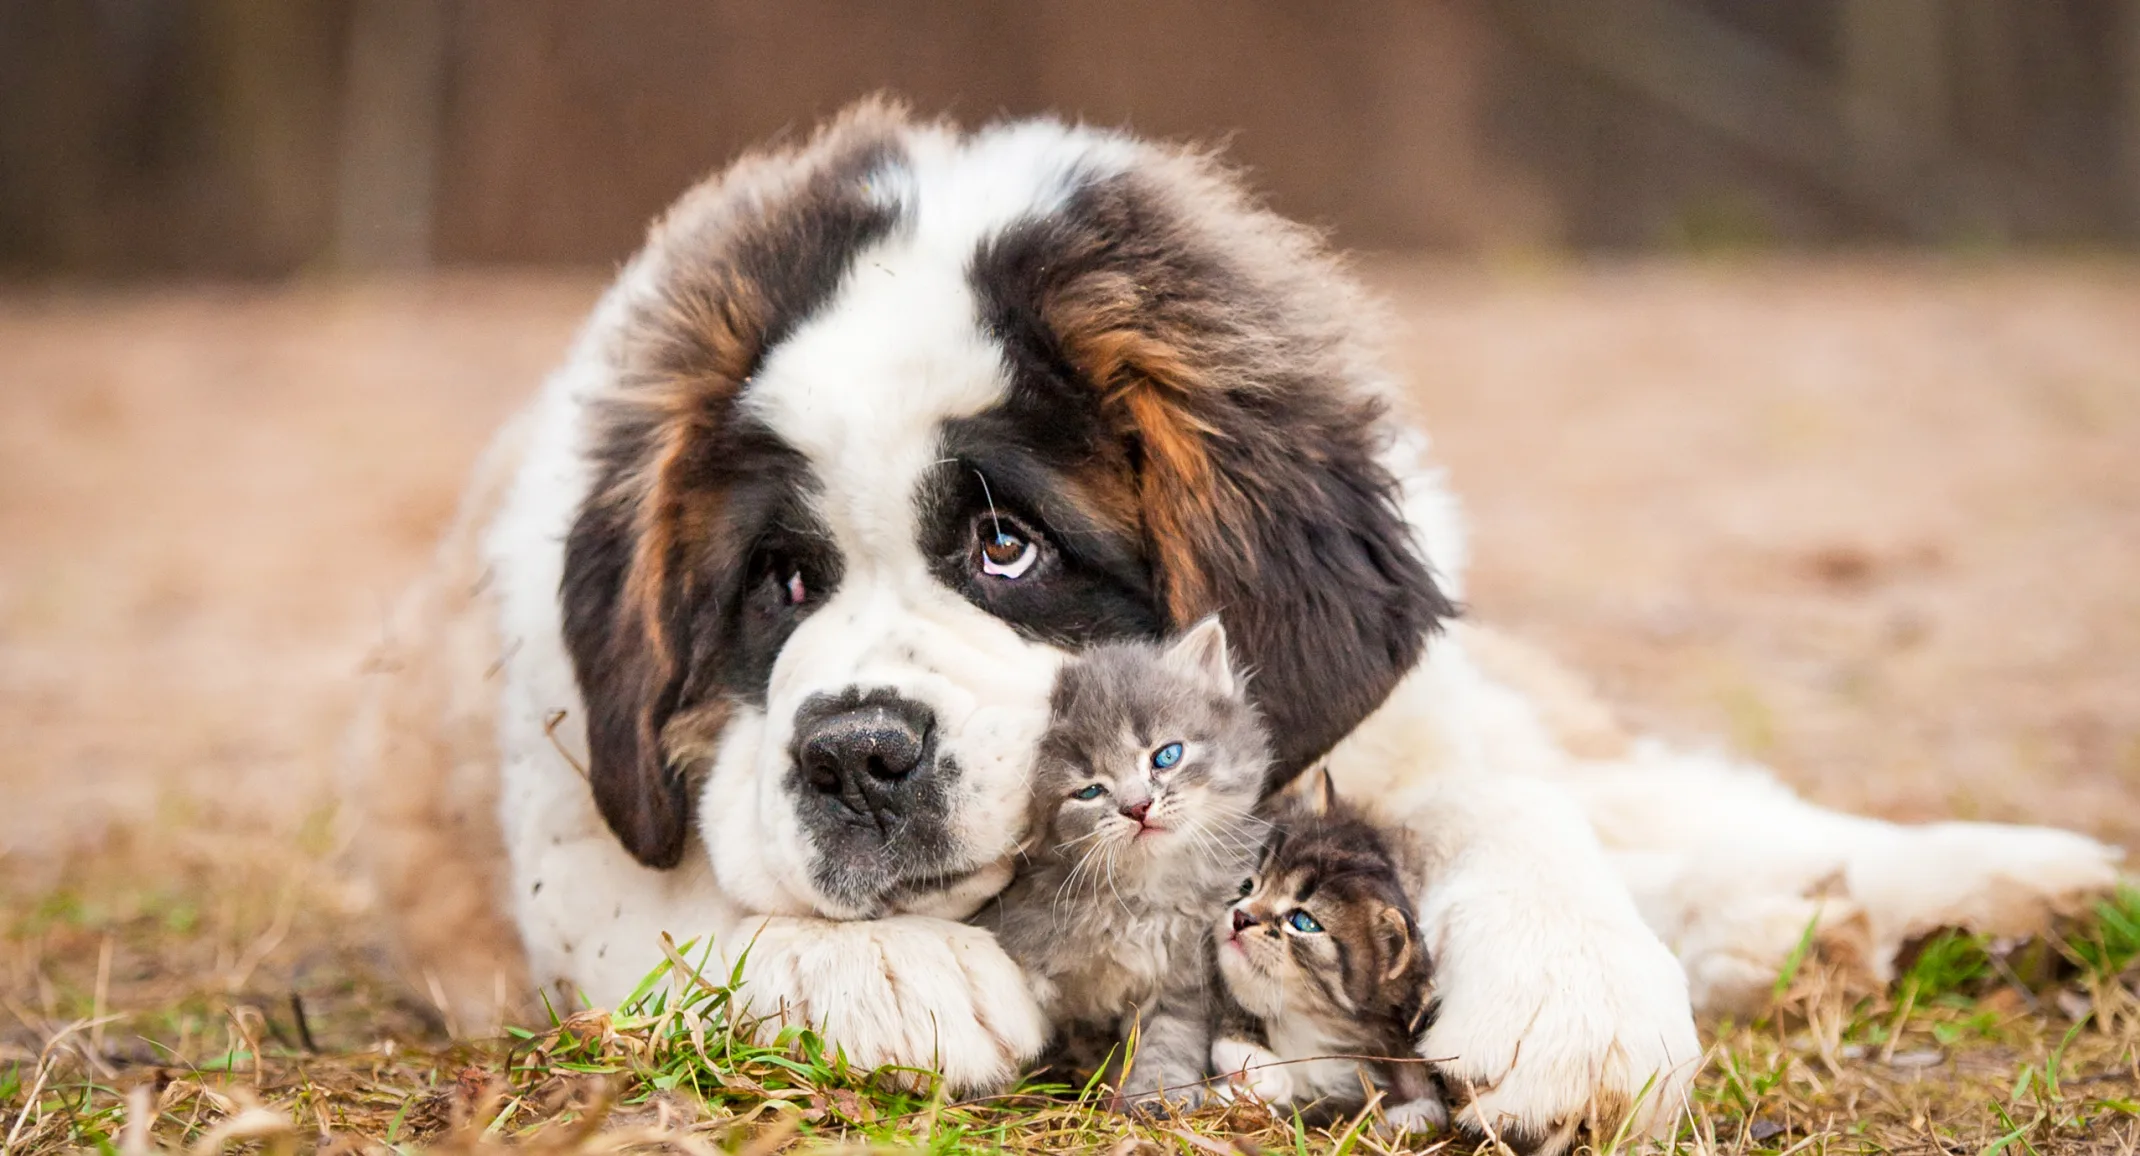 A dog cuddles two kittens laying on grass